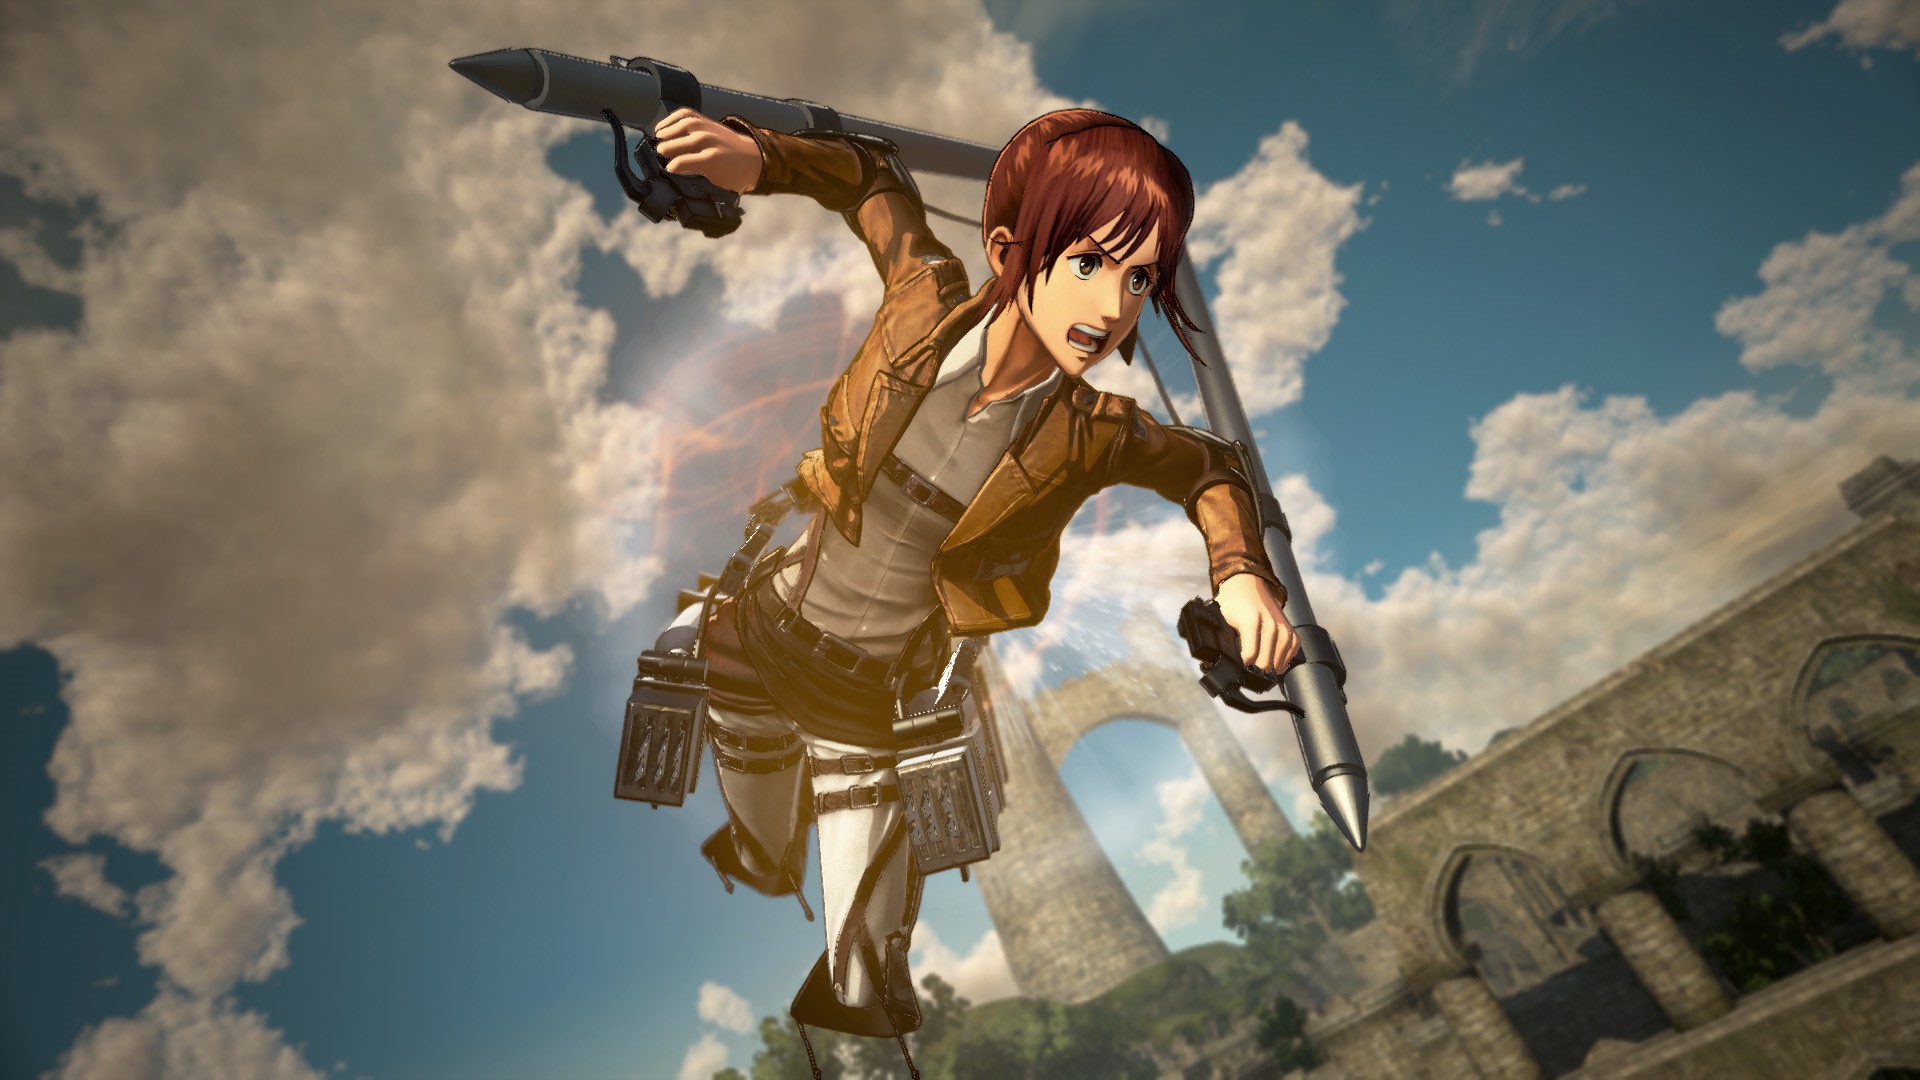 Attack on Titan 2 Has Online 4v4 Team Battles And Full Story Mode Co-op -  Siliconera